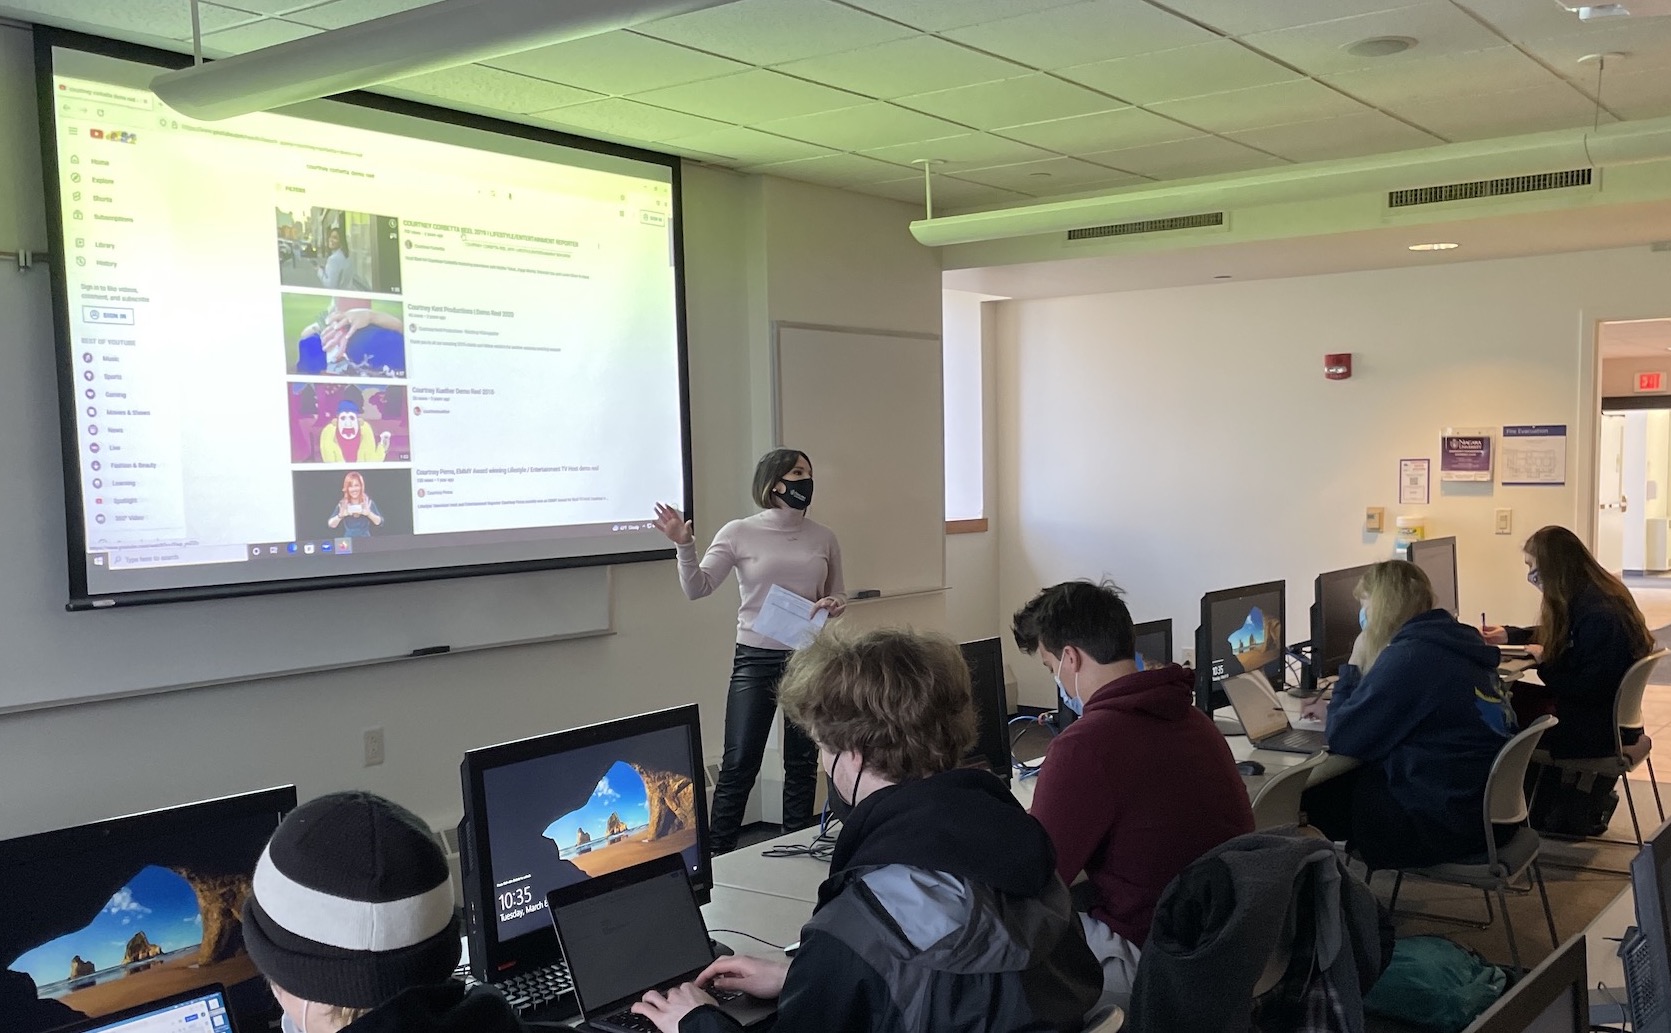 Niagara University Assistant Director of Alumni Engagement and Buffalo Sabres in-arena host Courtney Corbetta recently served as guest speaker in professor Joshua Maloni's communication and media studies course at Niagara University.